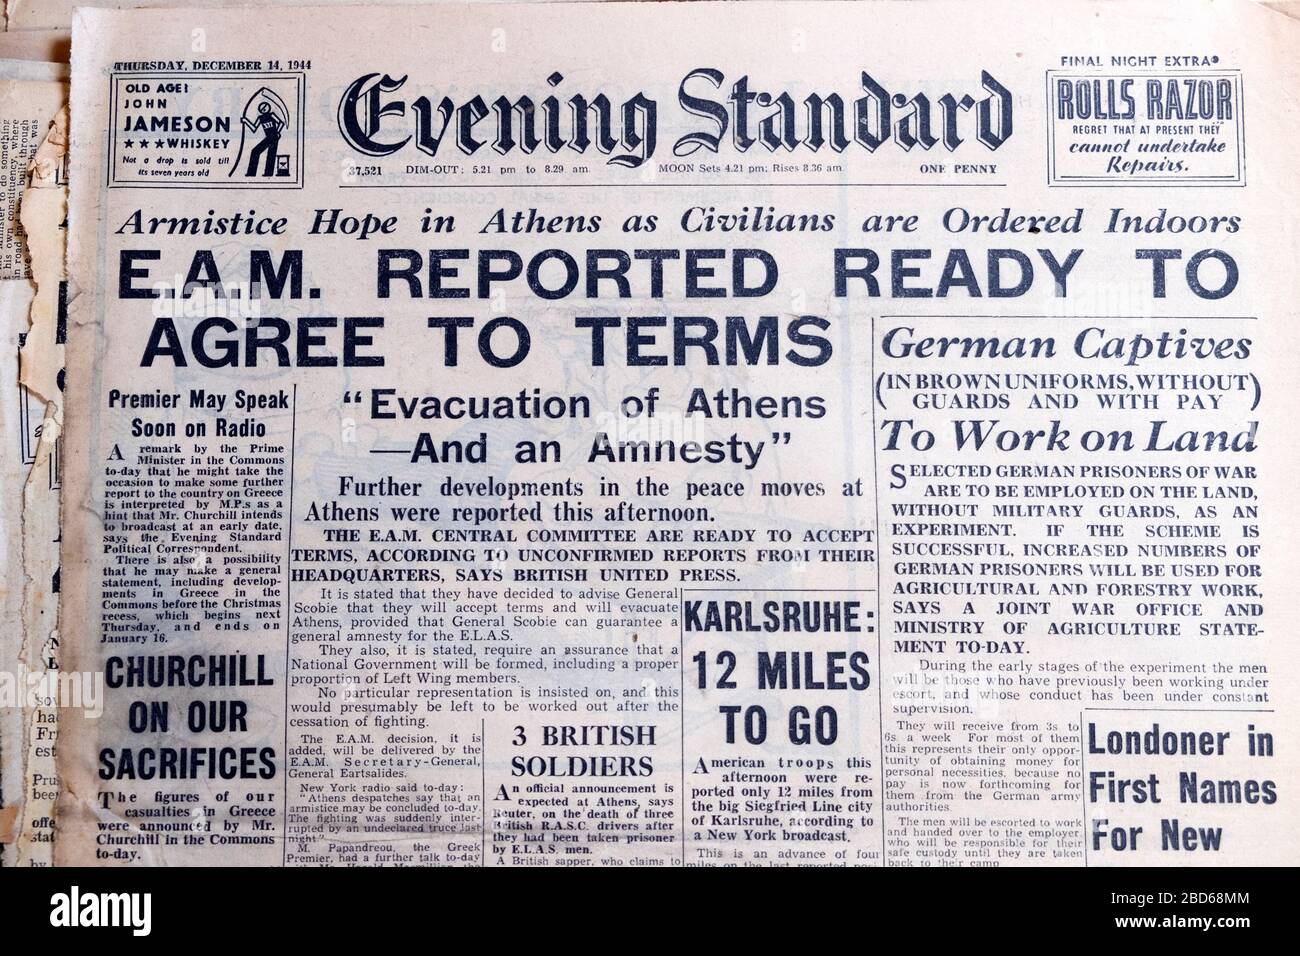 E.A.M Reported Ready to Agree to Terms"14 December 1944 Evening Standard  WWII British vintage newspaper headlines in London England Great Britain UK  Stock Photo - Alamy